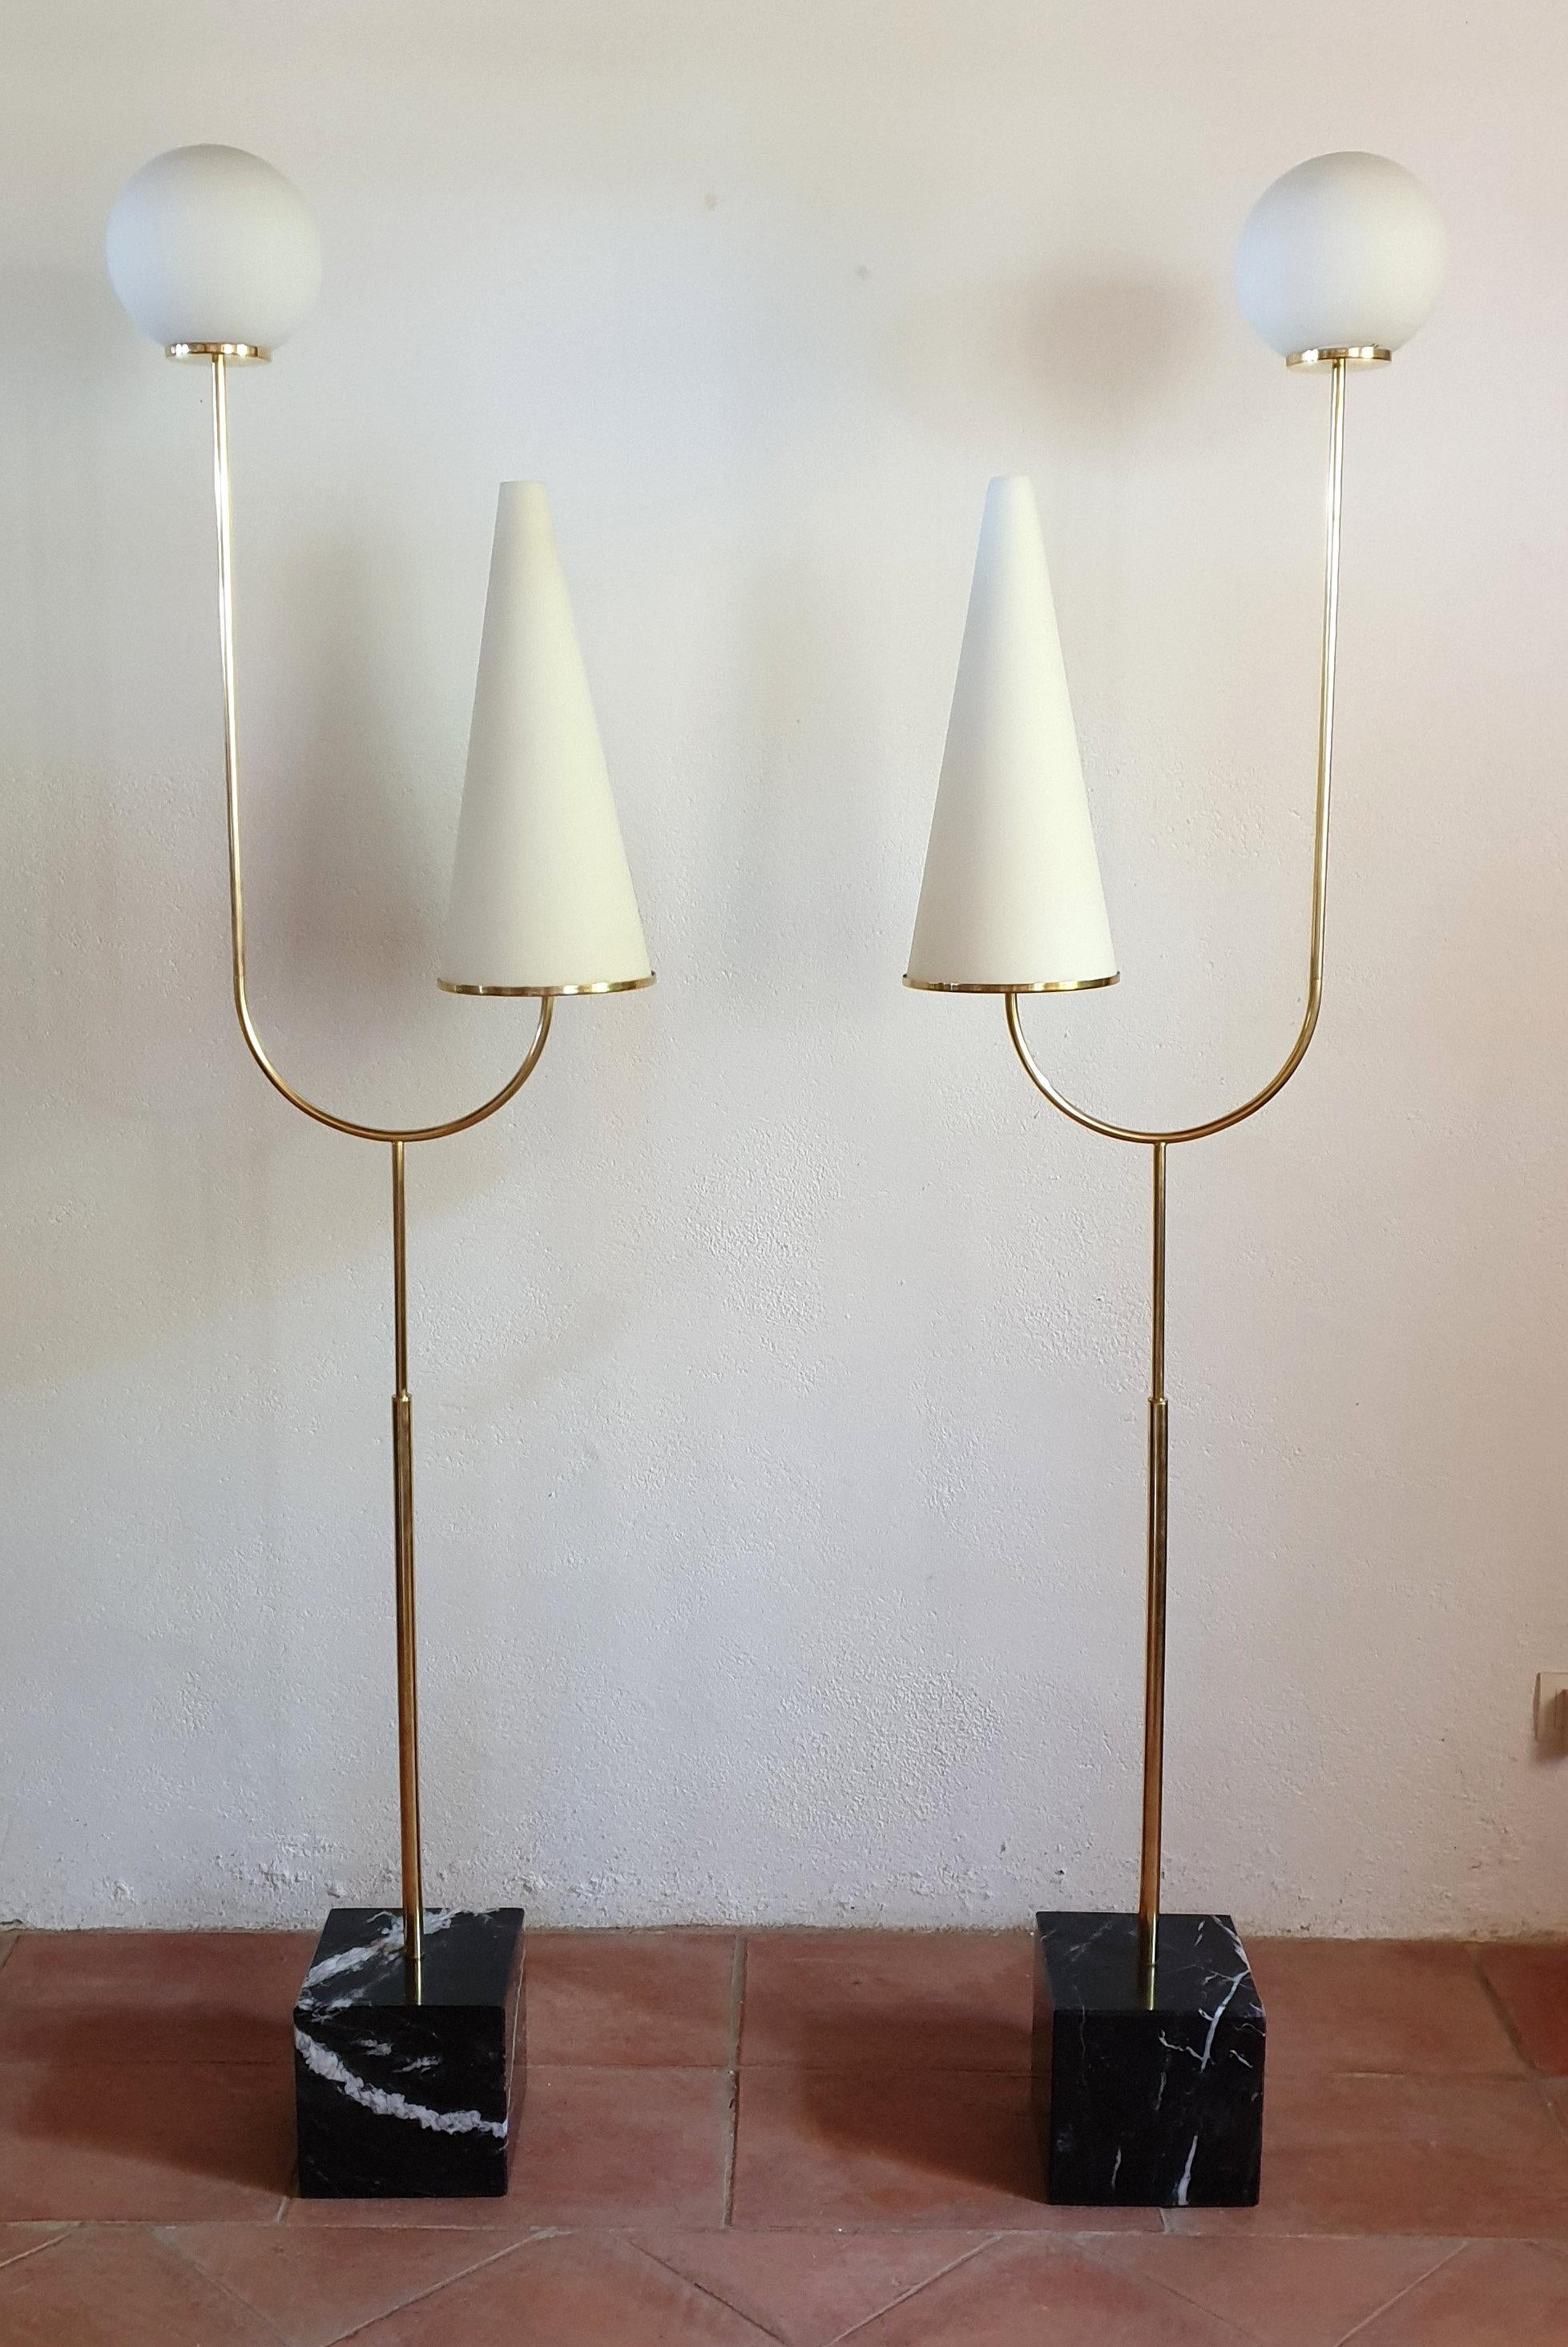 Pair of large Italian Mid-Century Modern floor lamps, circa 1960s
The Vintage Italian floor lamps are made of a black marble, with white veins square base: 8 in. side, brass tubes and two milk glasses, with 1 light bulb each.
Rewired for the